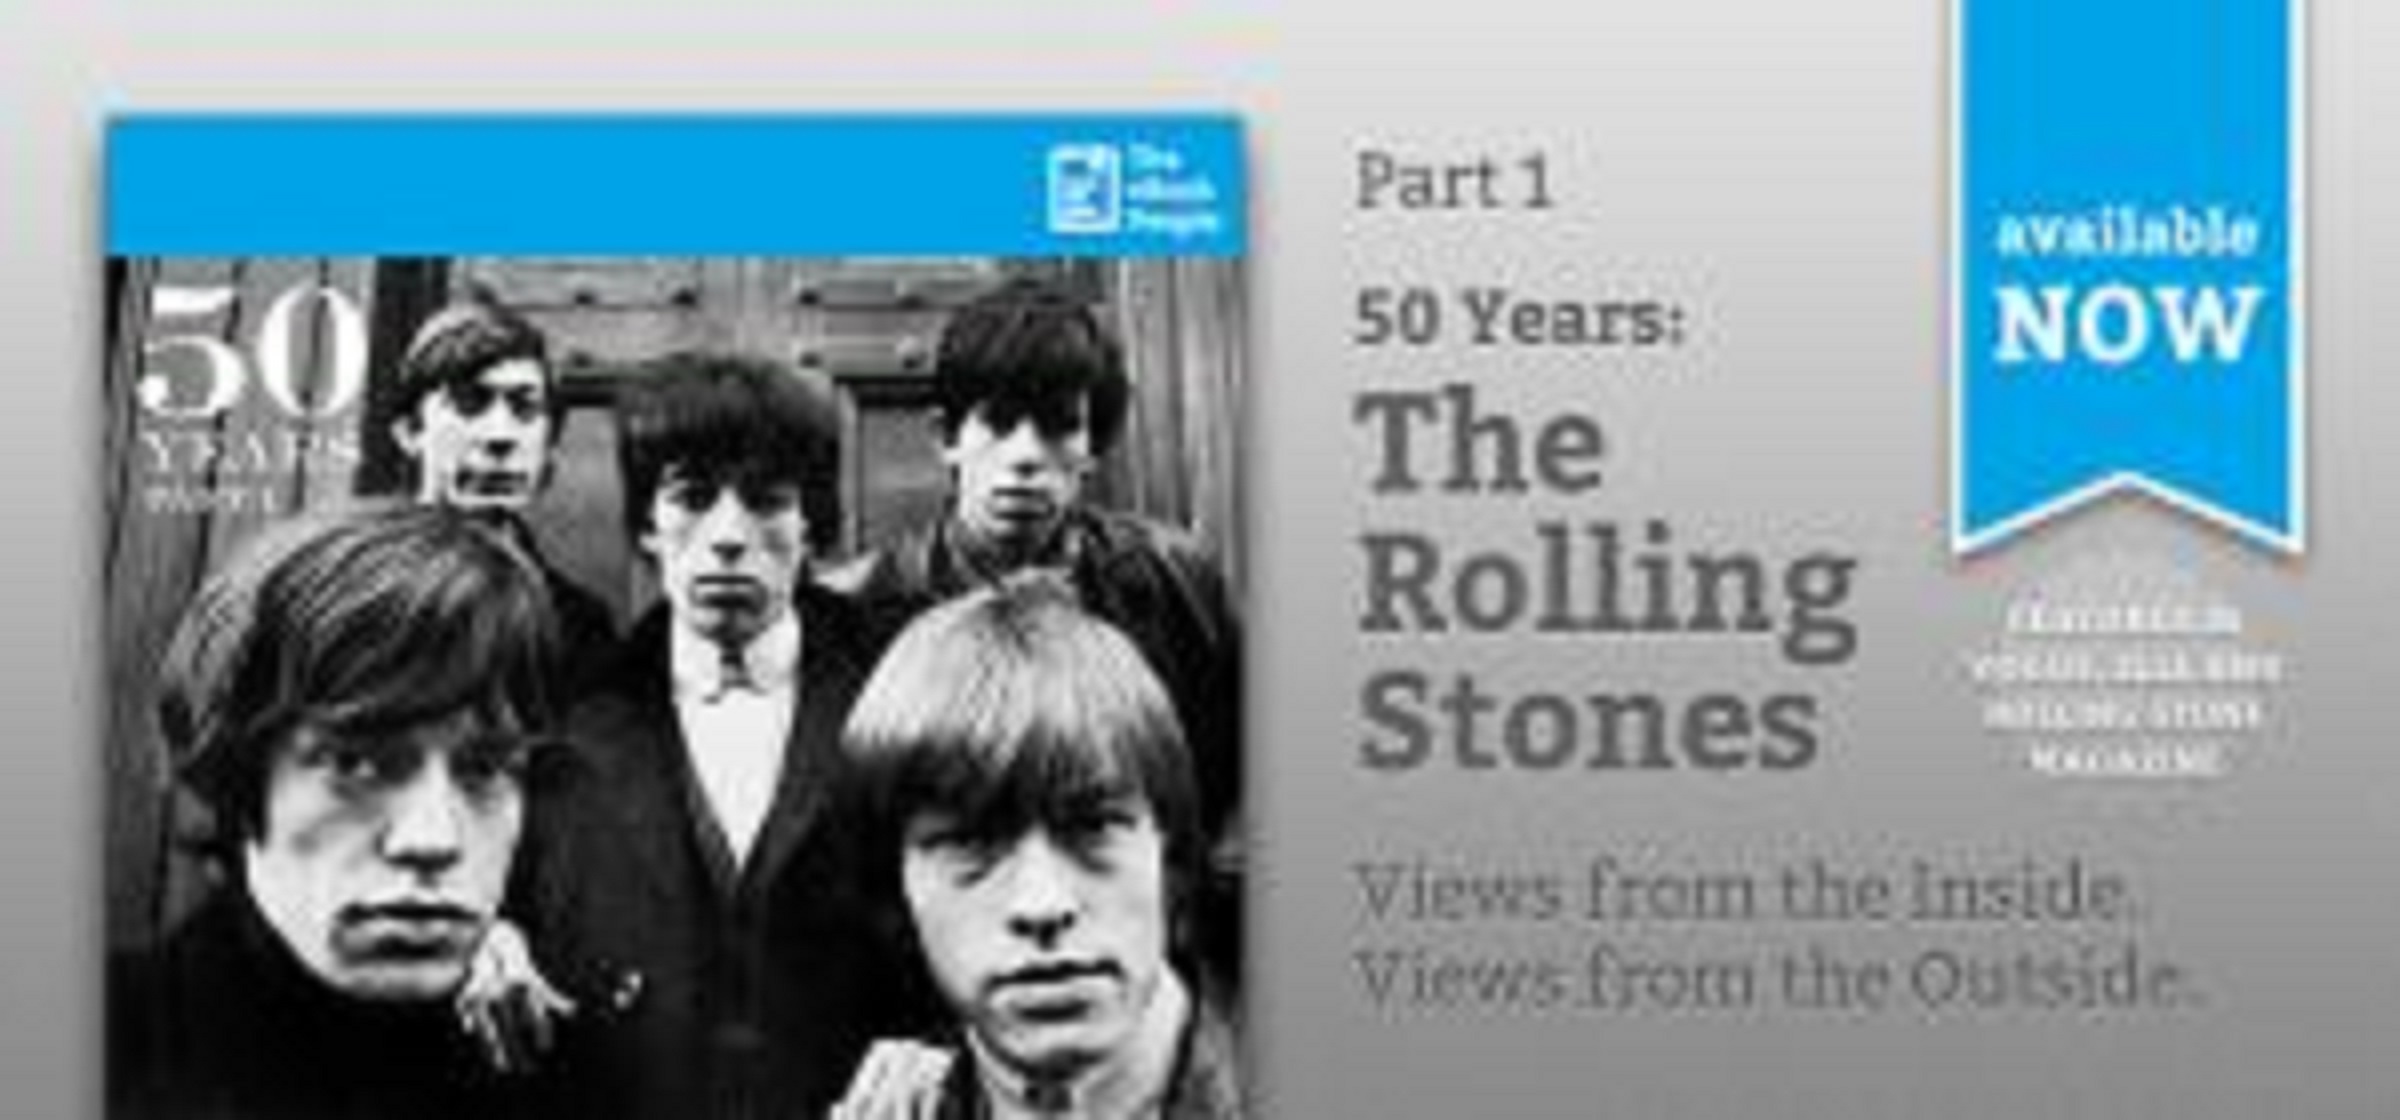 The Rolling Stones on eBook | Review